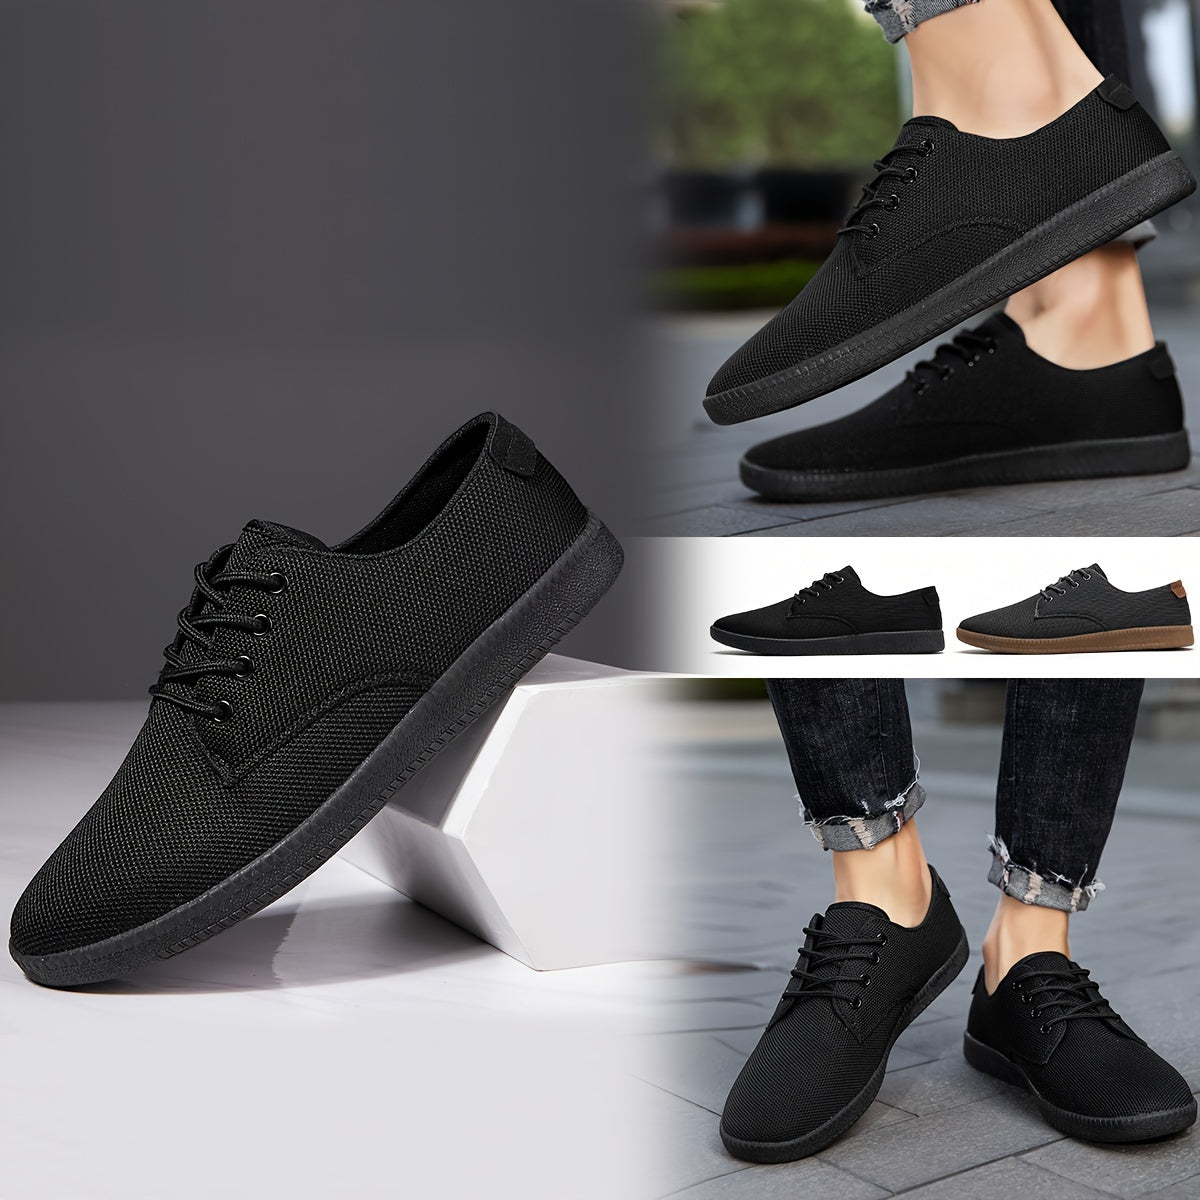 Men's Solid Versatile Skate Shoes, Breathable Wear-resistant Non Slip Lace-up Shoes For Outdoor Casual, Men's Street Footwear